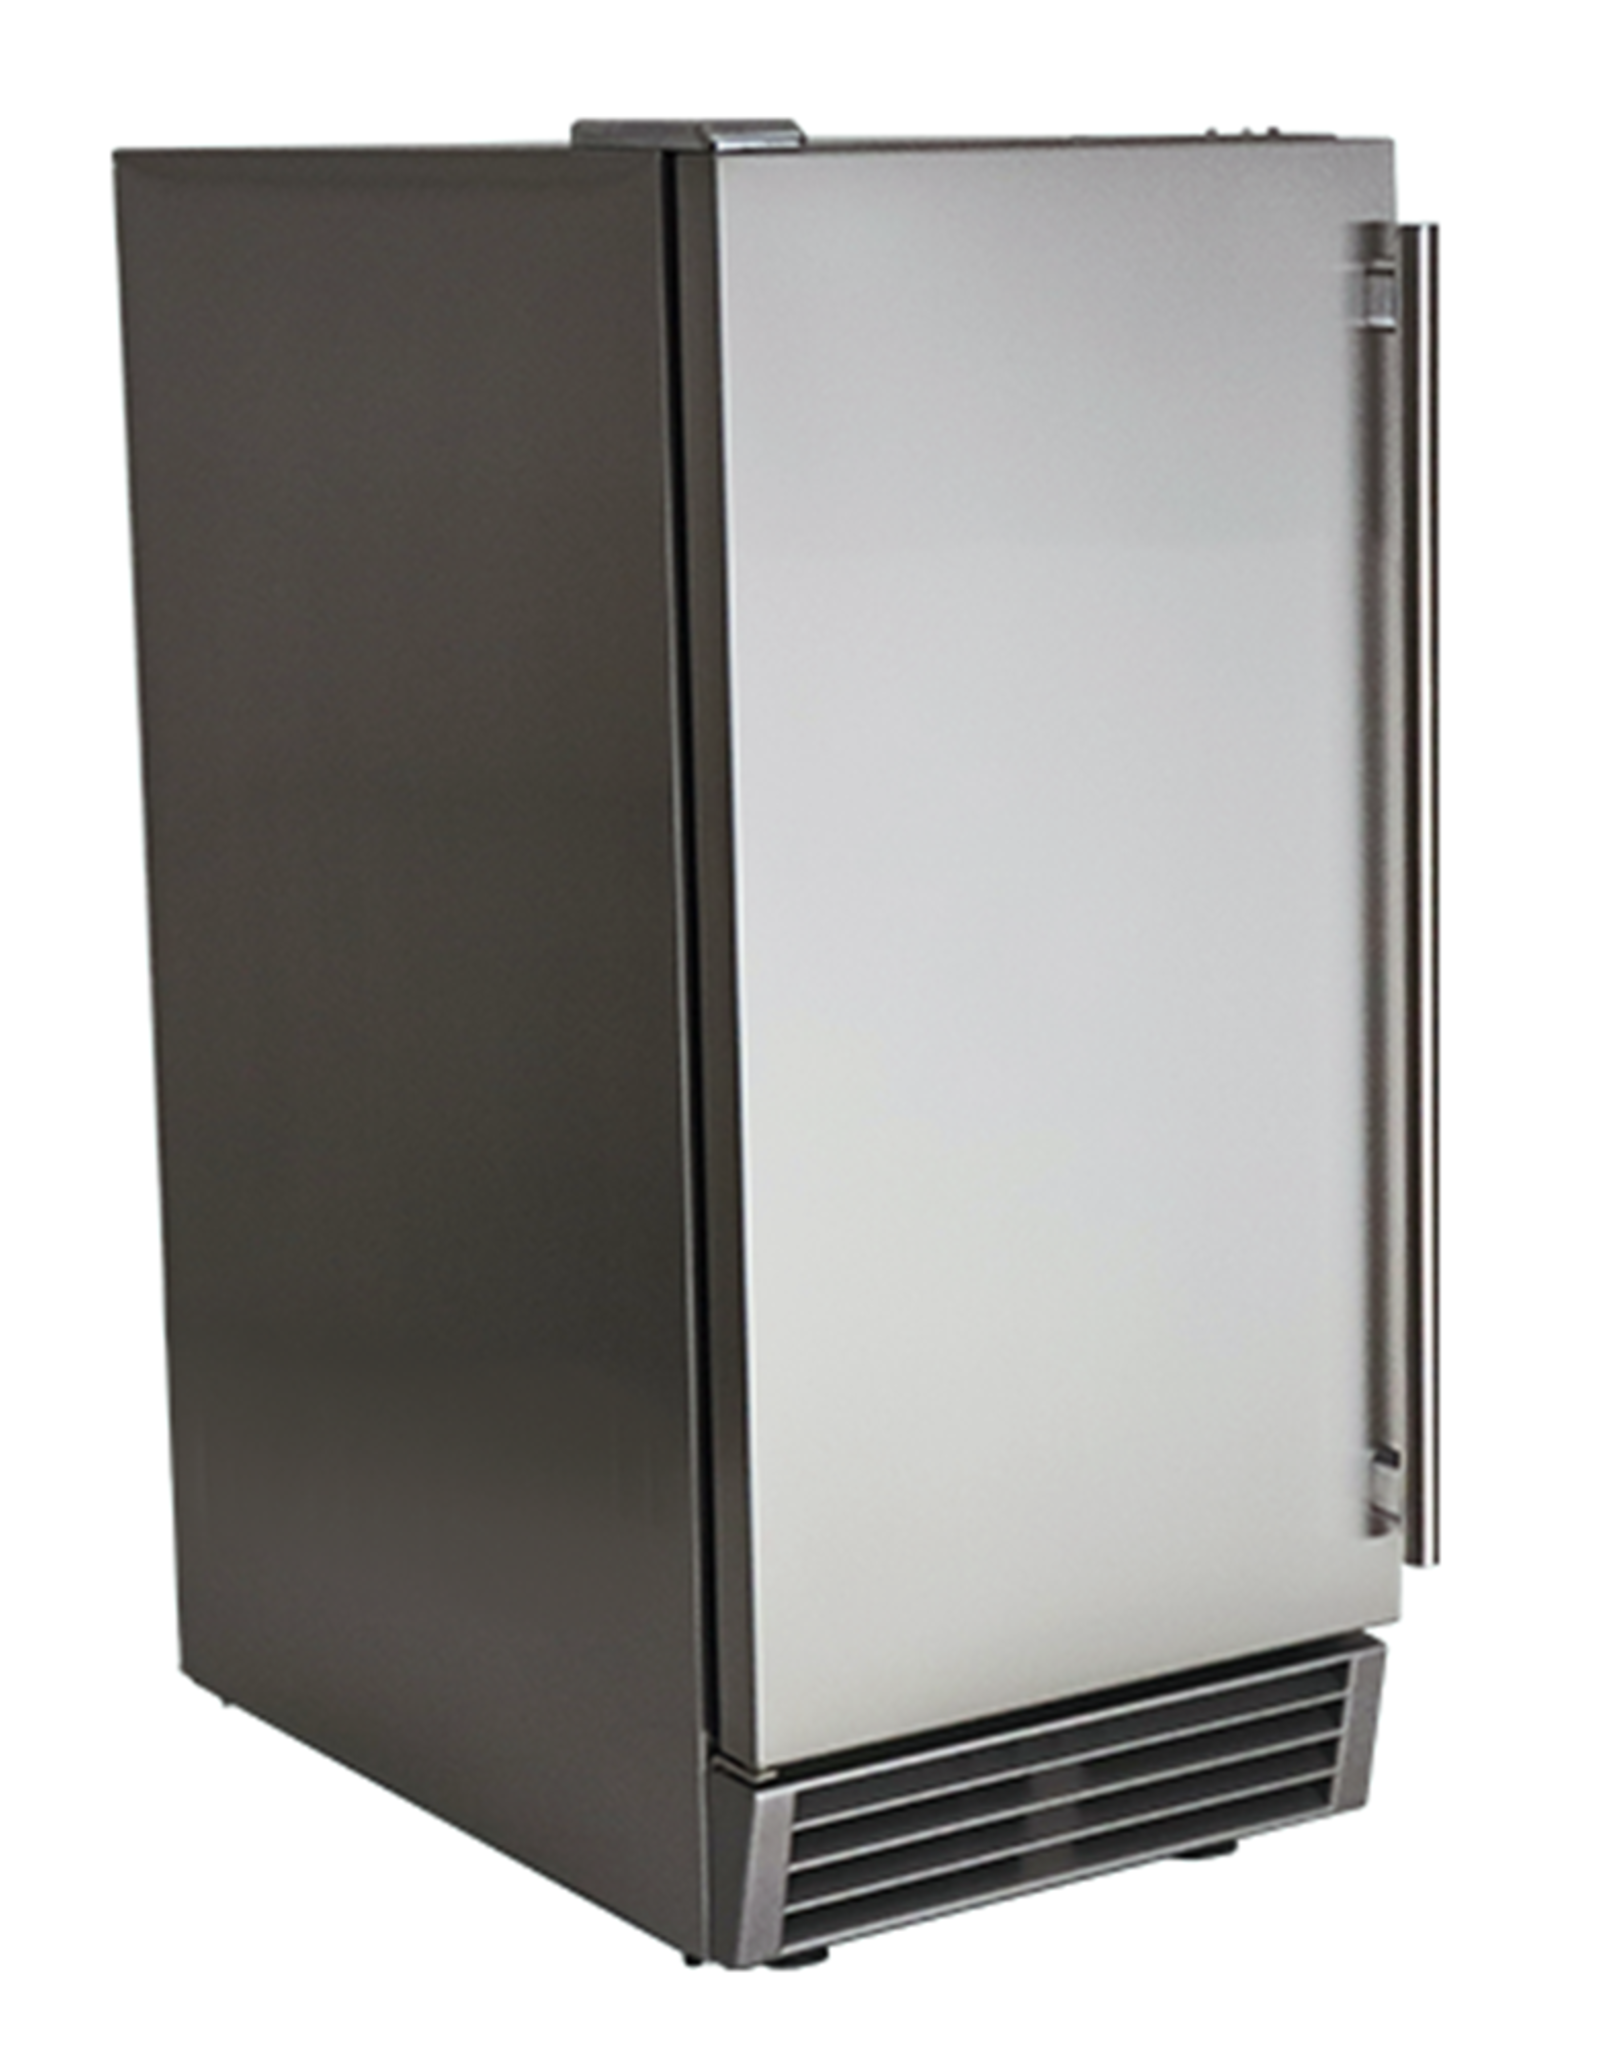 Renaissance Cooking Systems Renaissance Cooking Systems UL Rated Ice Maker - REFR3